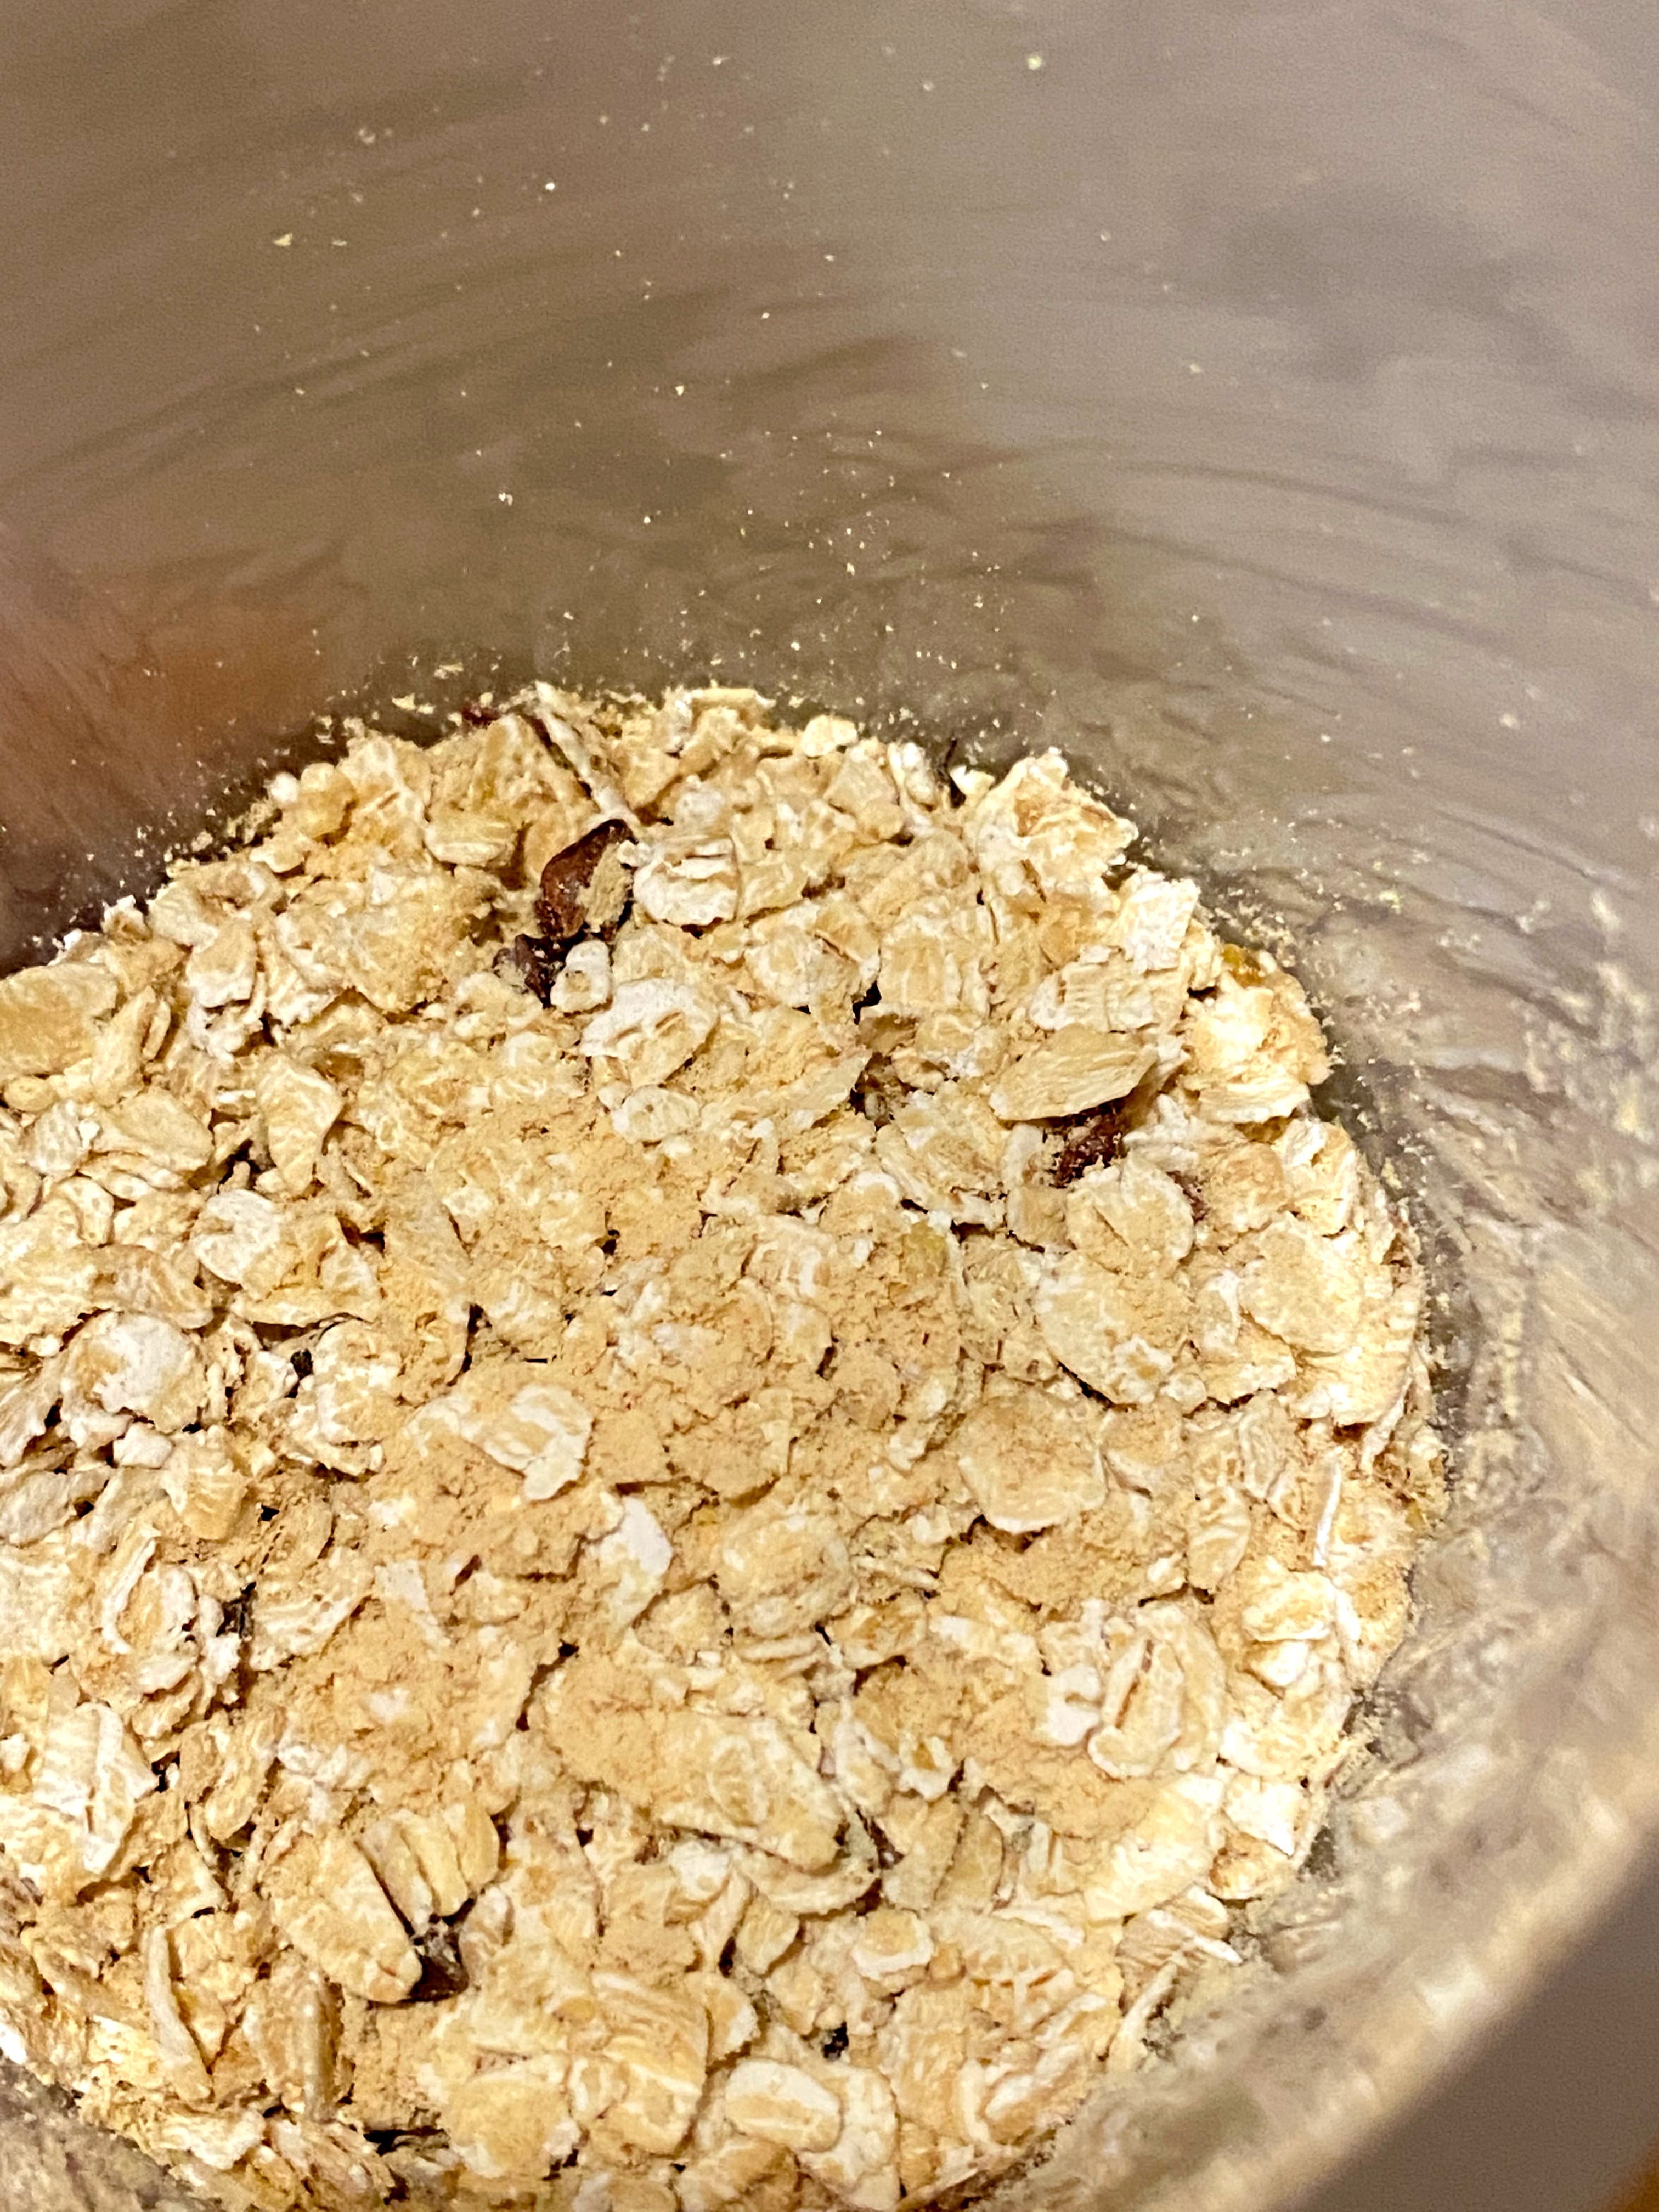 Oats Overnight Review - Must Read This Before Buying